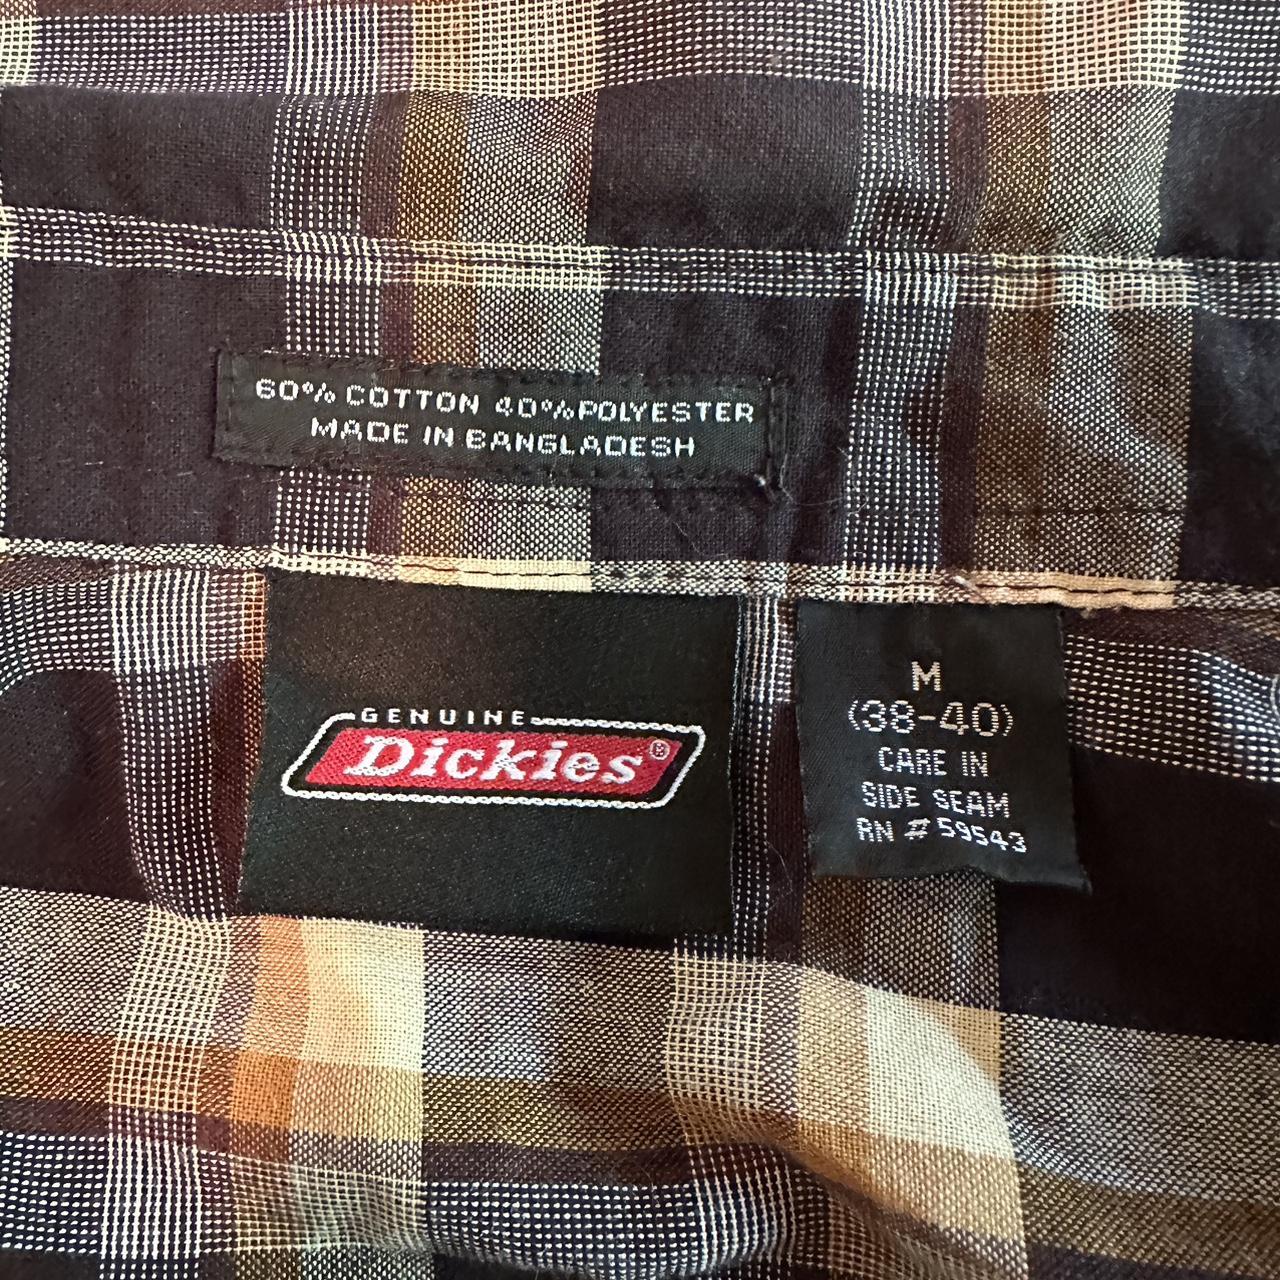 Genuine Dickies Button Up Size M - Depop